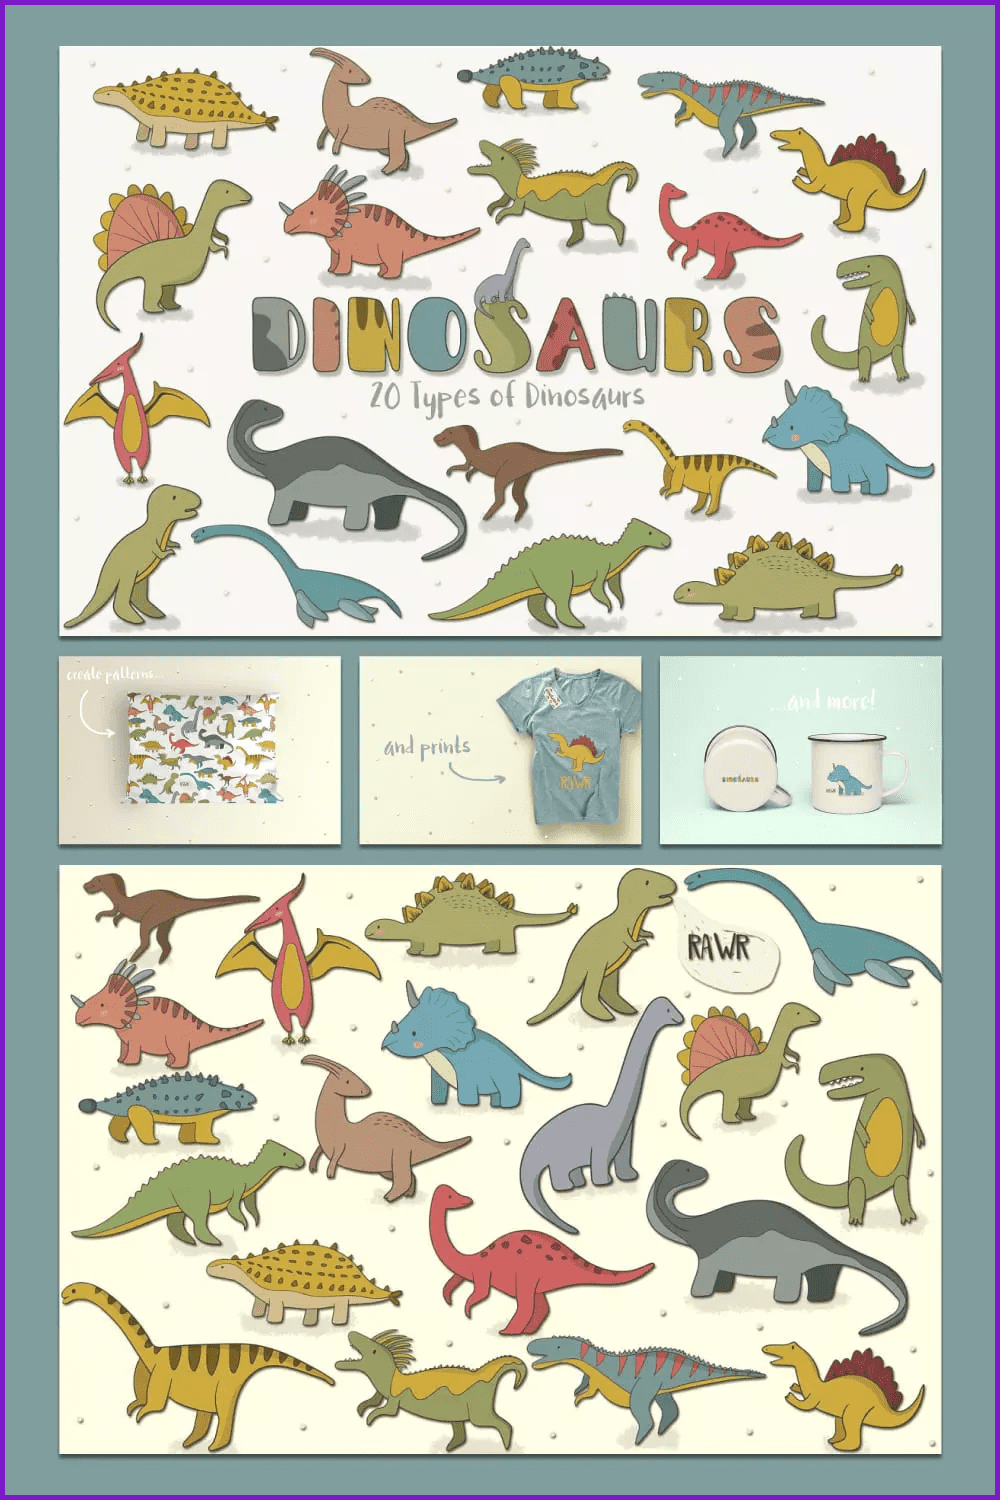 Cute drawing colorful dinosaurs.